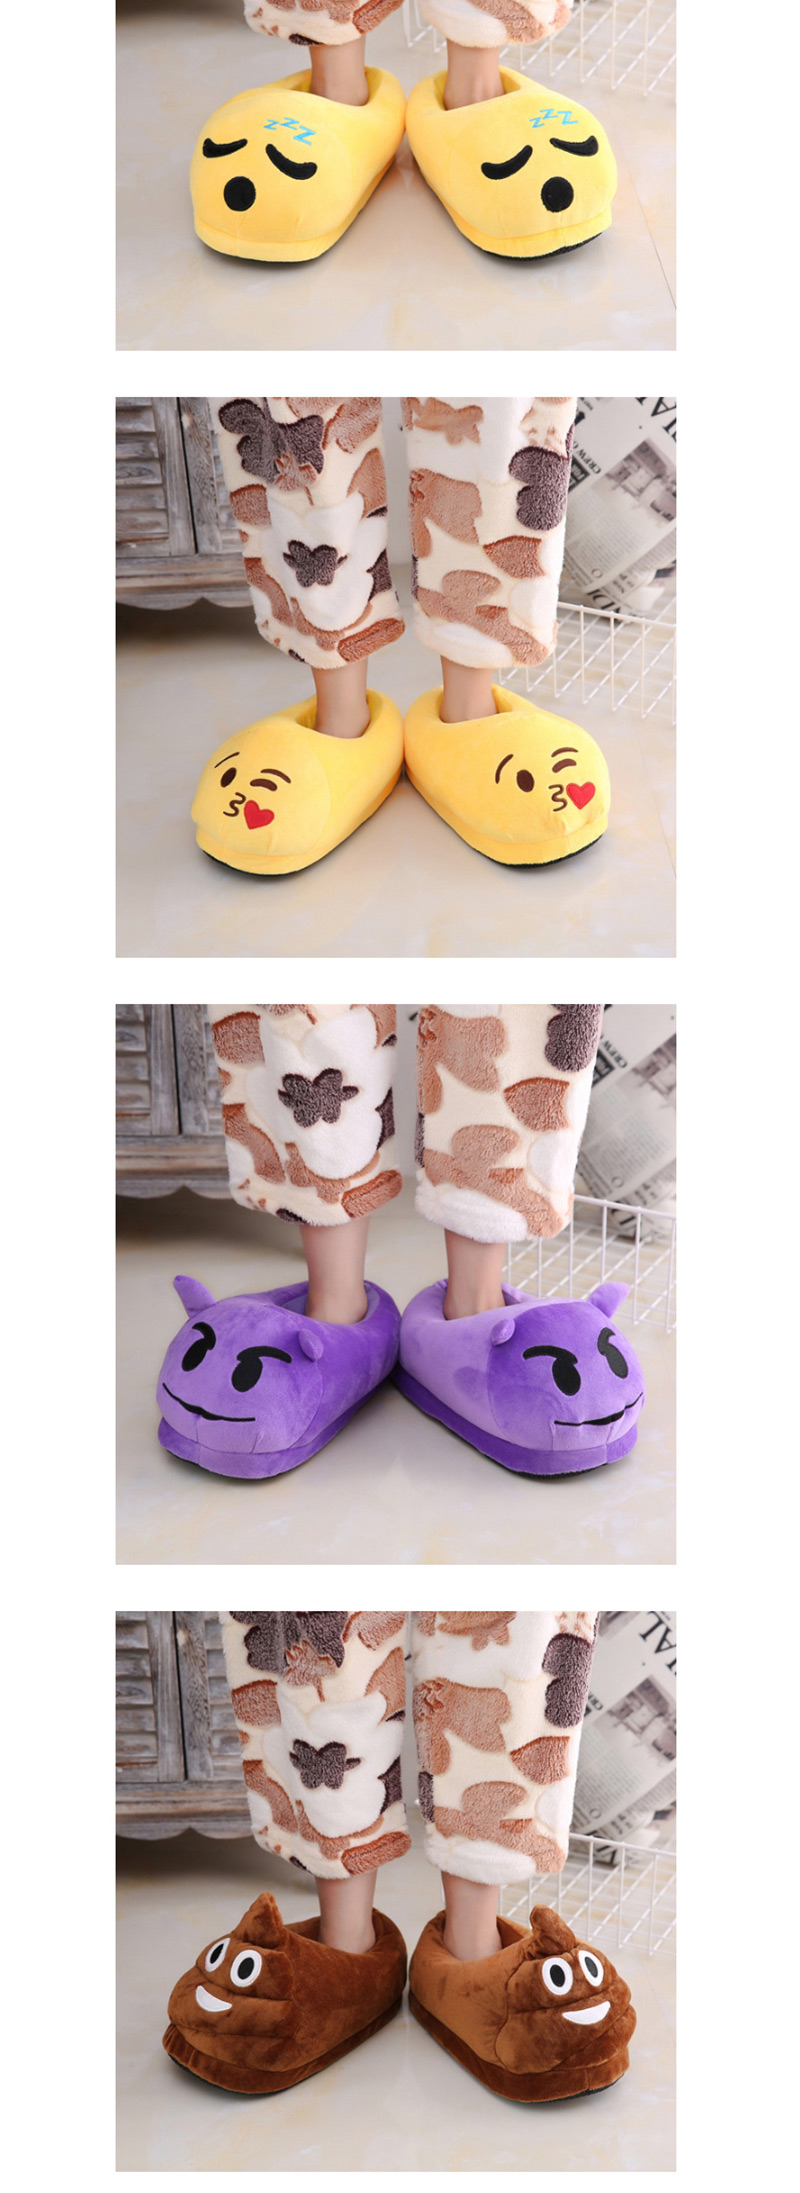 Fashion 5 Yellow Tongue Out Cartoon Expression Plush Bag With Cotton Slippers,Slippers